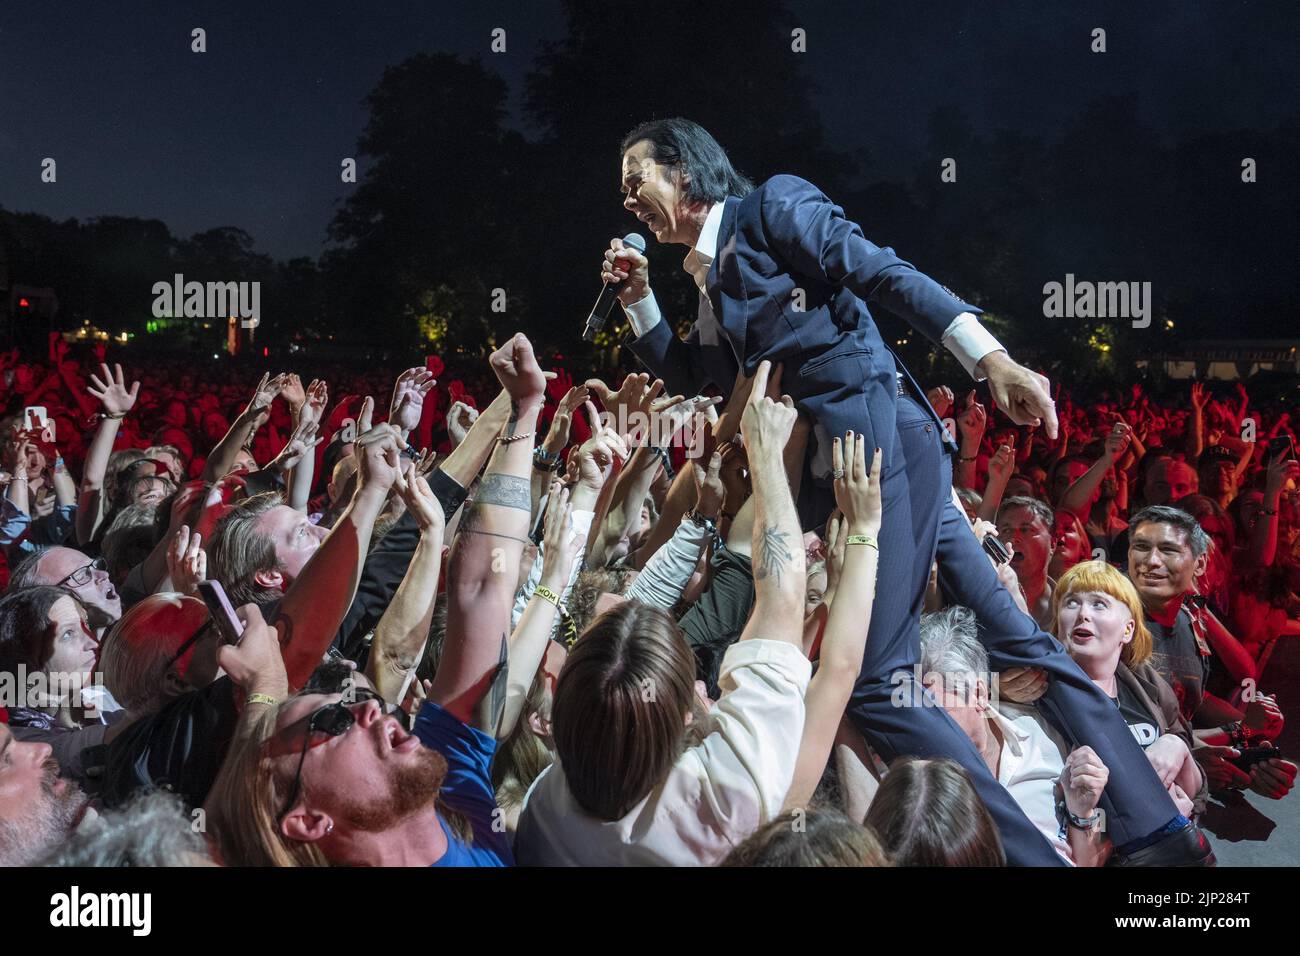 Nick Cave performs during Swedish music festival Way Out West 2022 in Gothenburg, Sweden, August 12, 2022.Photo: Anders Deros / Aftonbladet / TT code Stock Photo